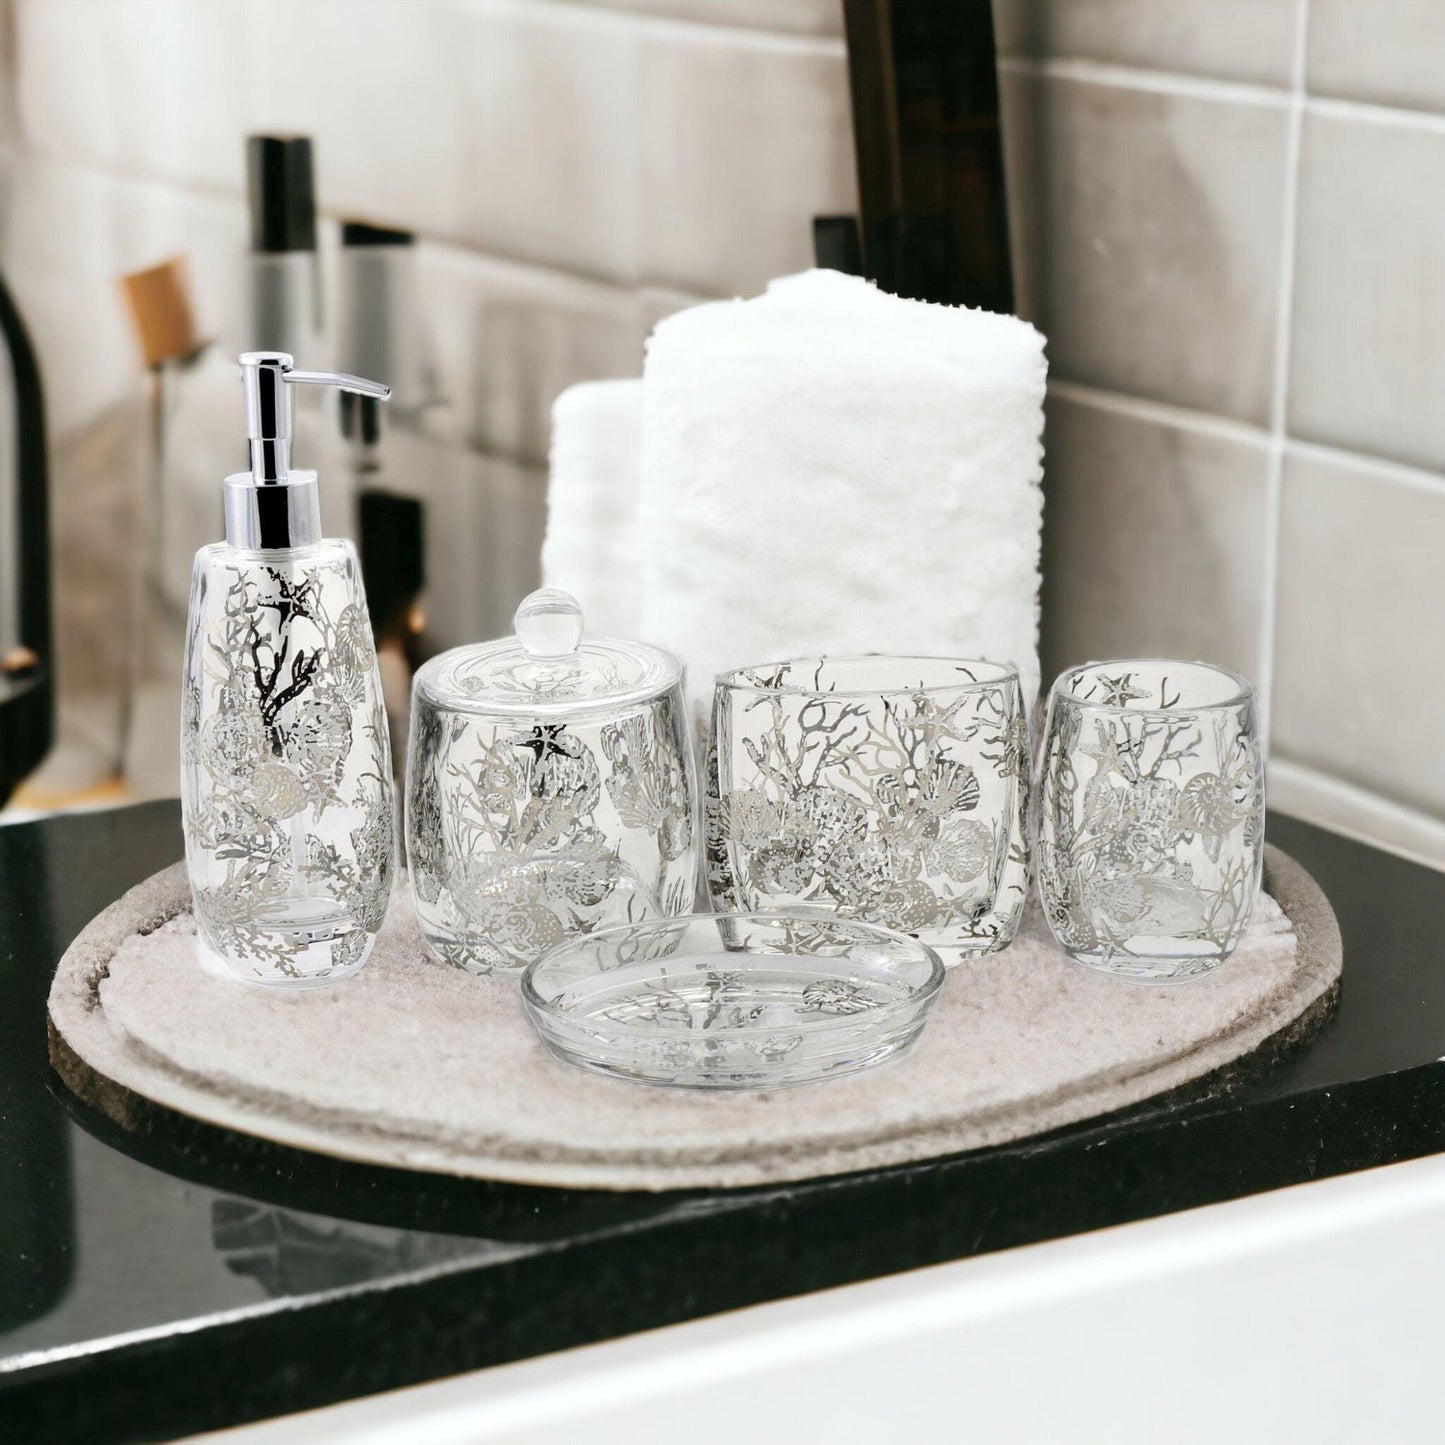 Bathroom Set of Glass in Antlers Design - Nature Home Decor